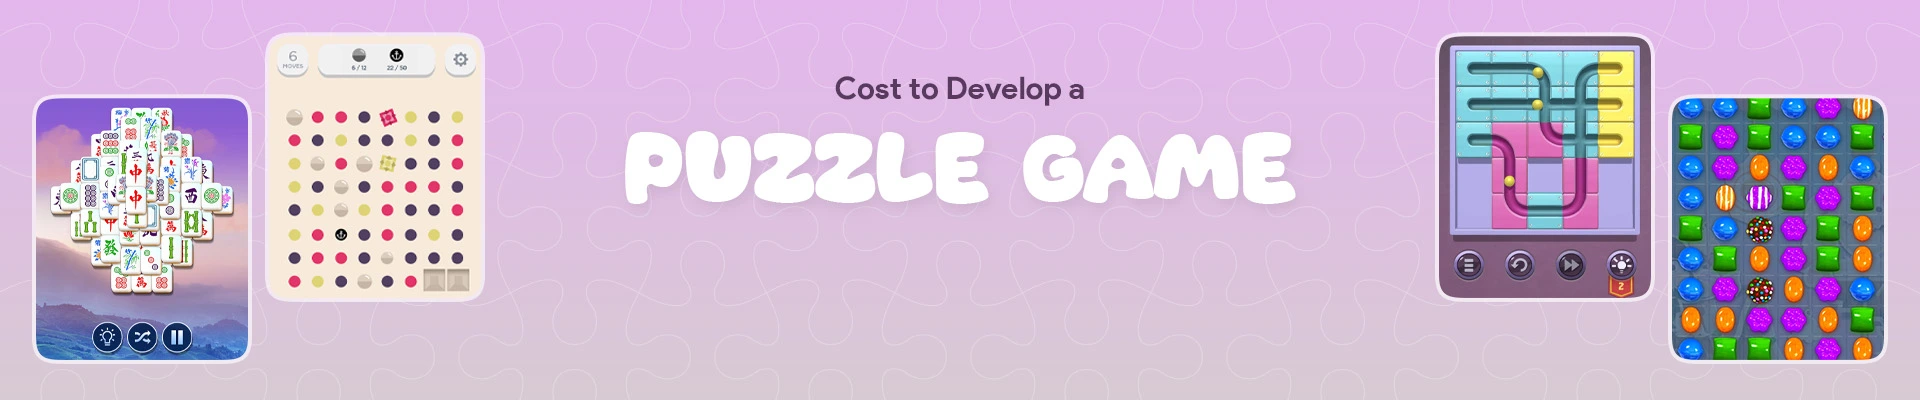 Cost to Develop a Puzzle Game